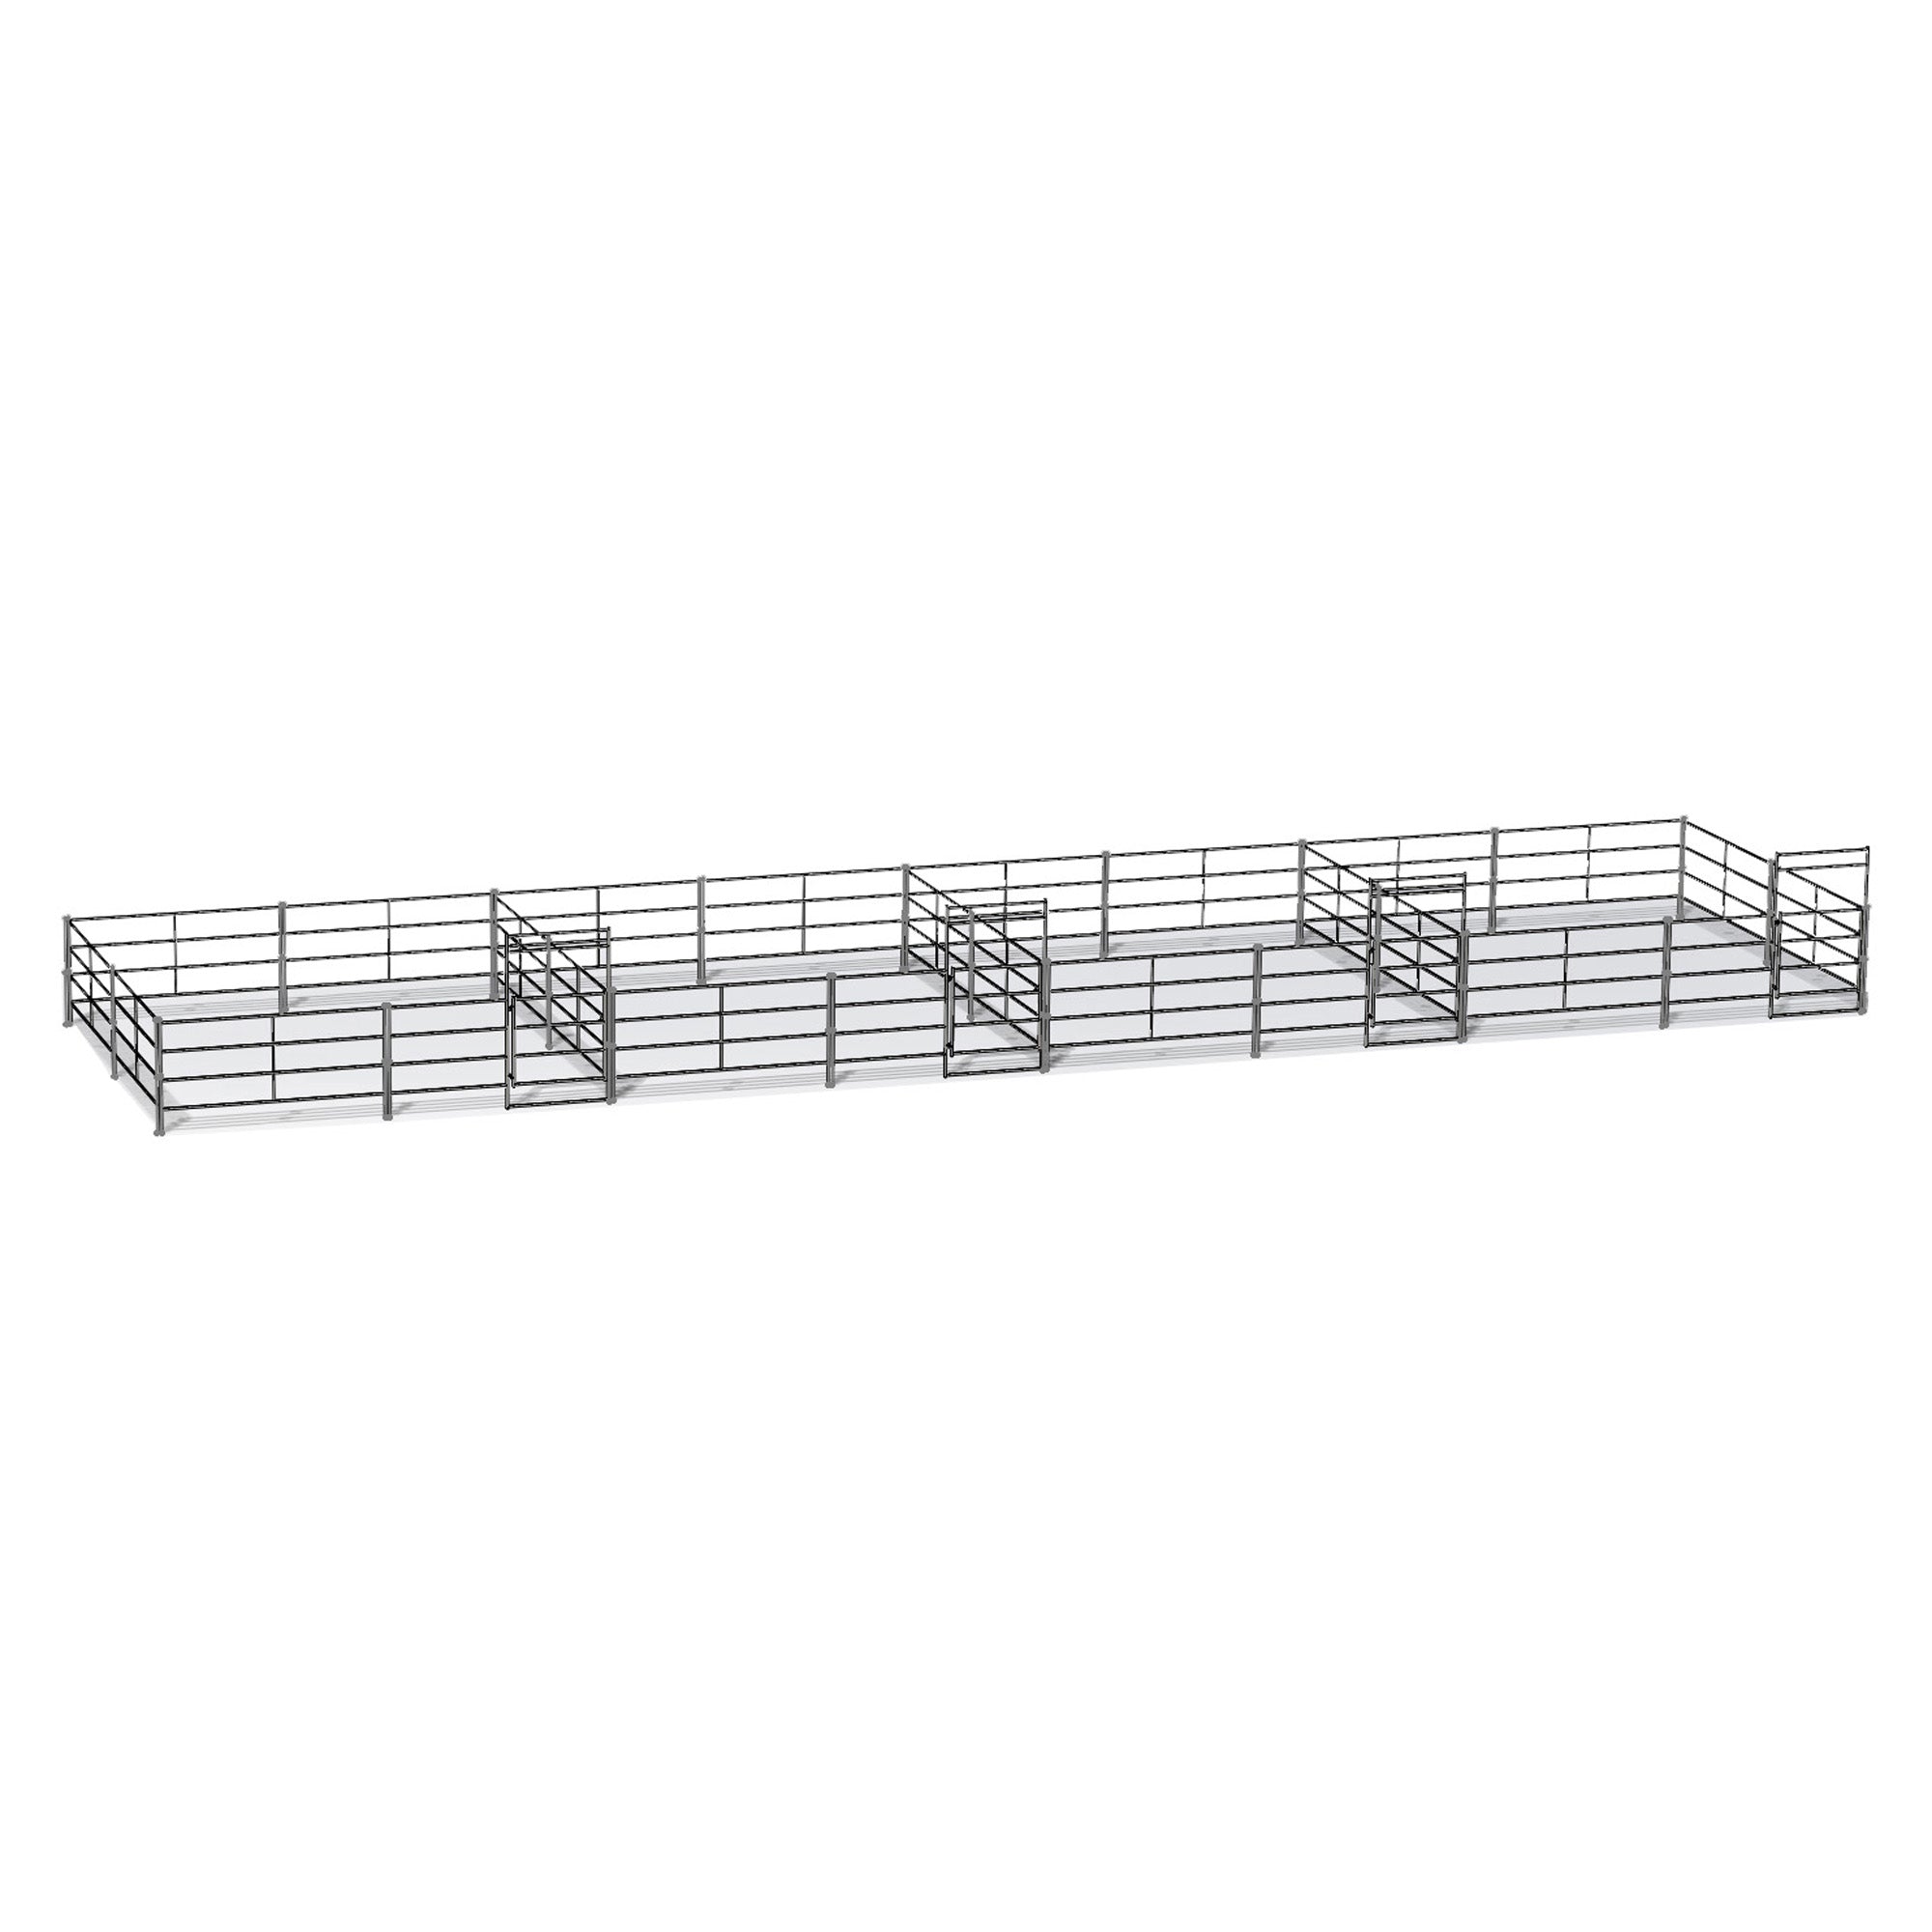 Four 20 Ft X 20 Ft Side by Side Stall Kit (4 Rail)